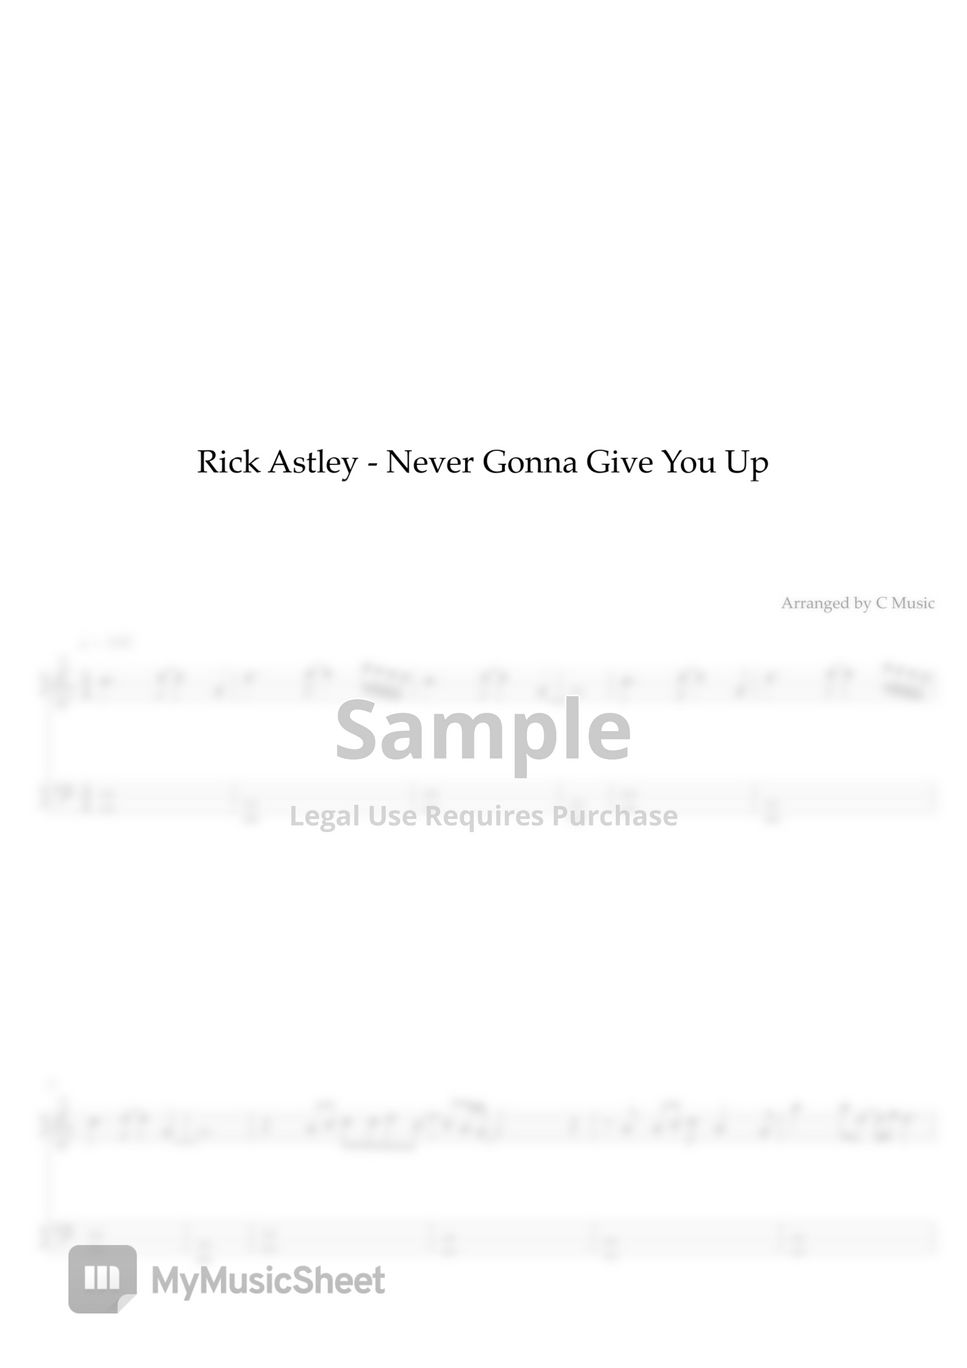 Rick Astley - - Never Gonna Give You Up (Easy Version) by C Music